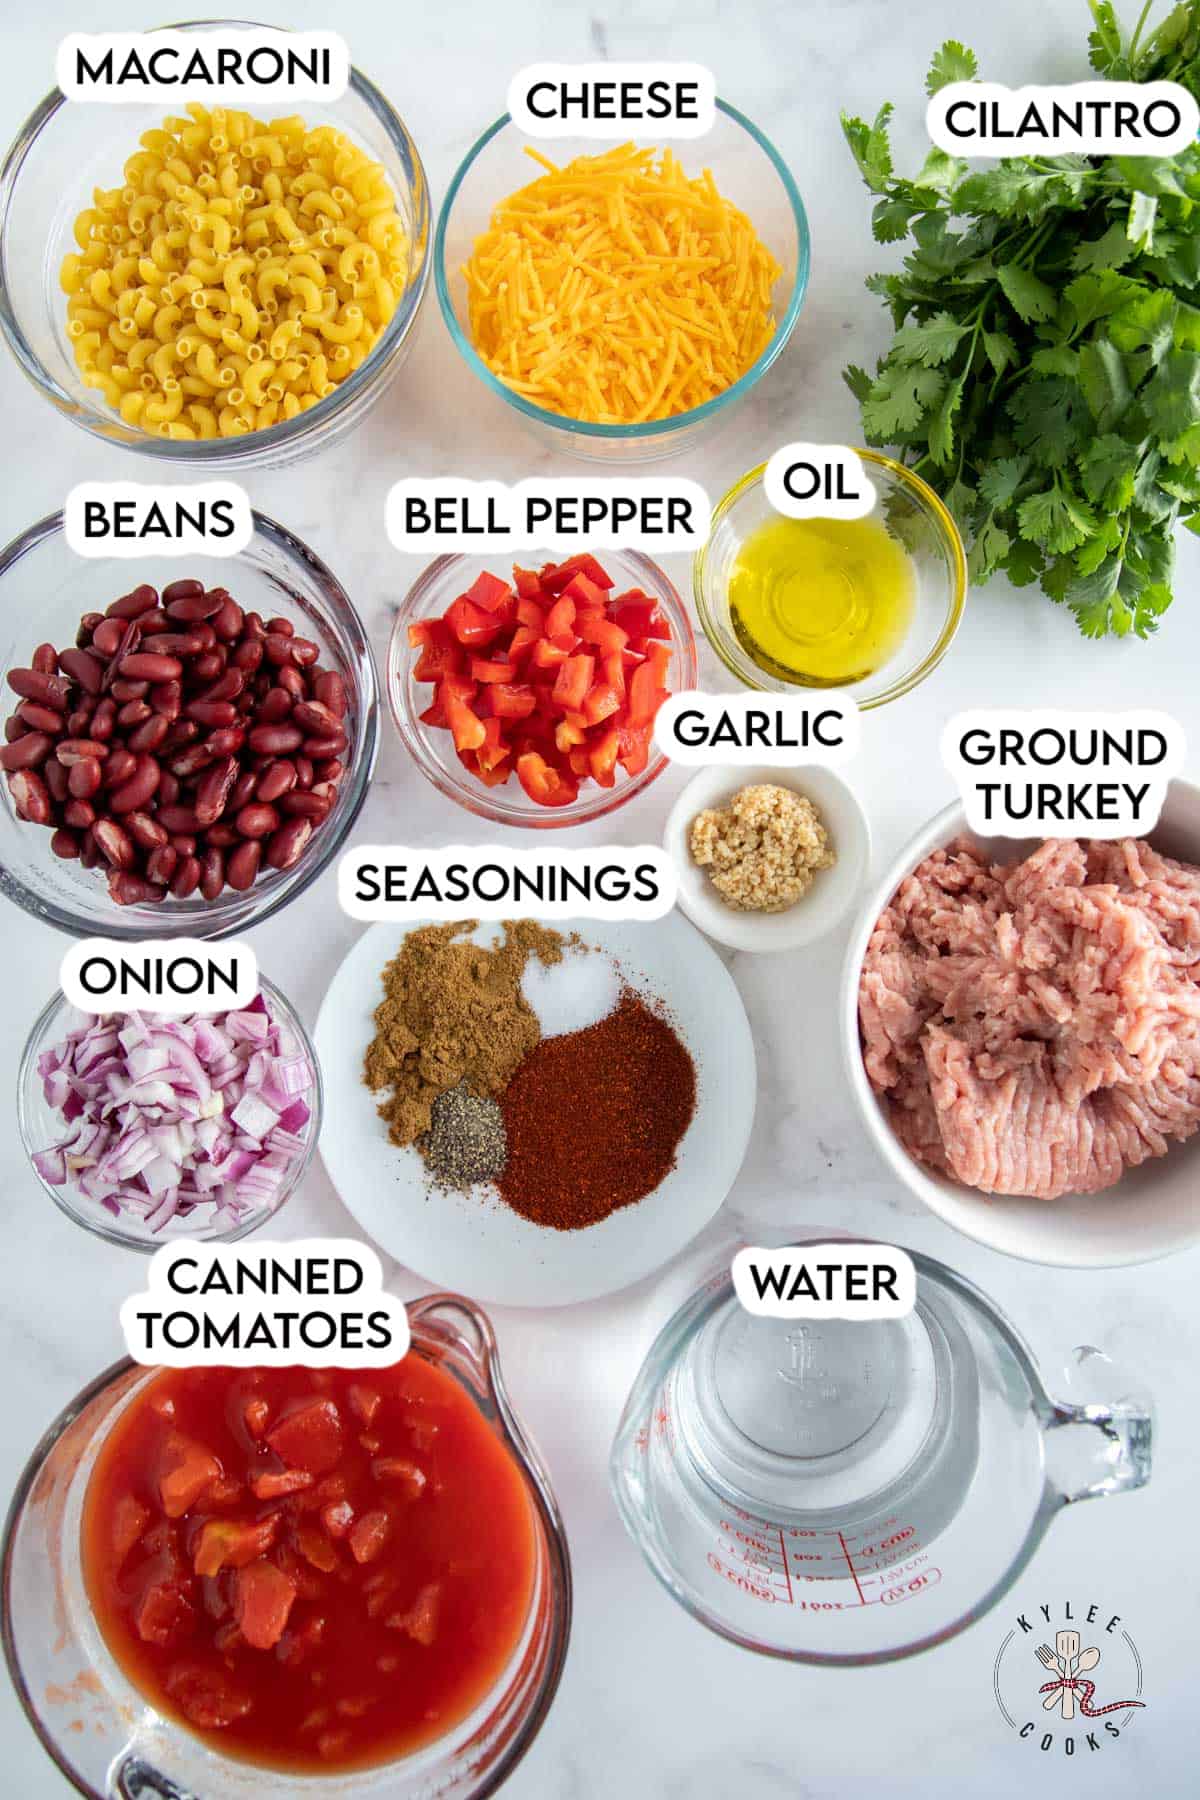 ingredients to make chili mac with turkey laid out and labeled.